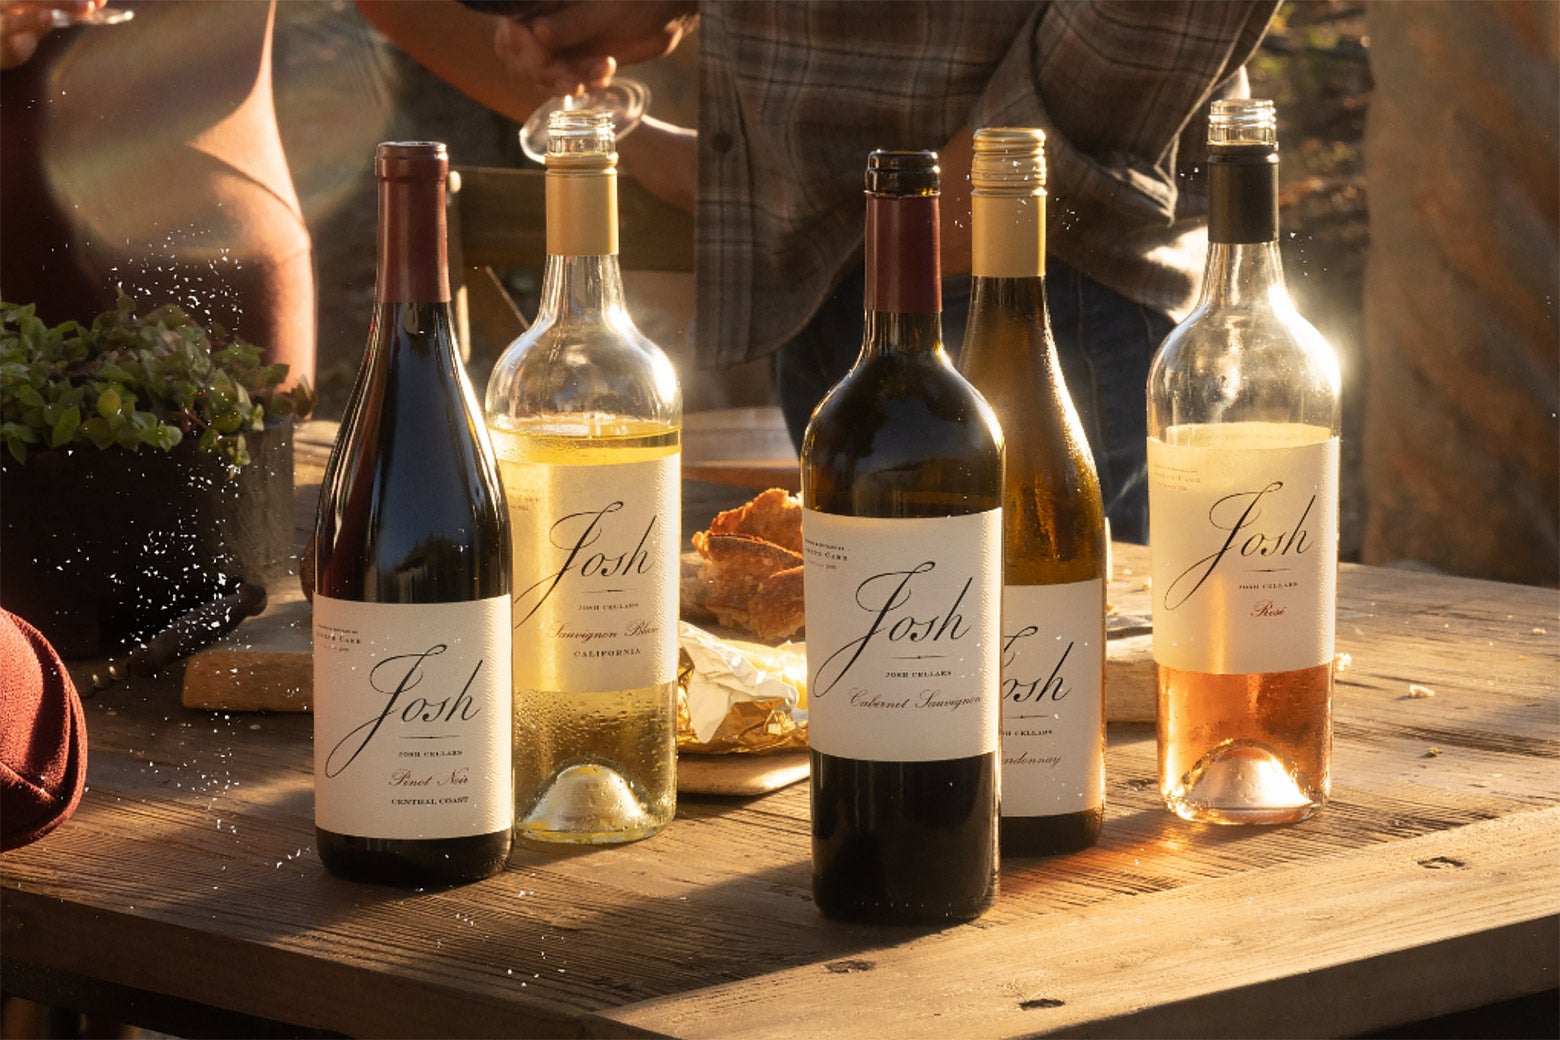 Multiple bottles of Josh wine sit on a rustic-looking wooden table, with the sunlight streaming behind them.